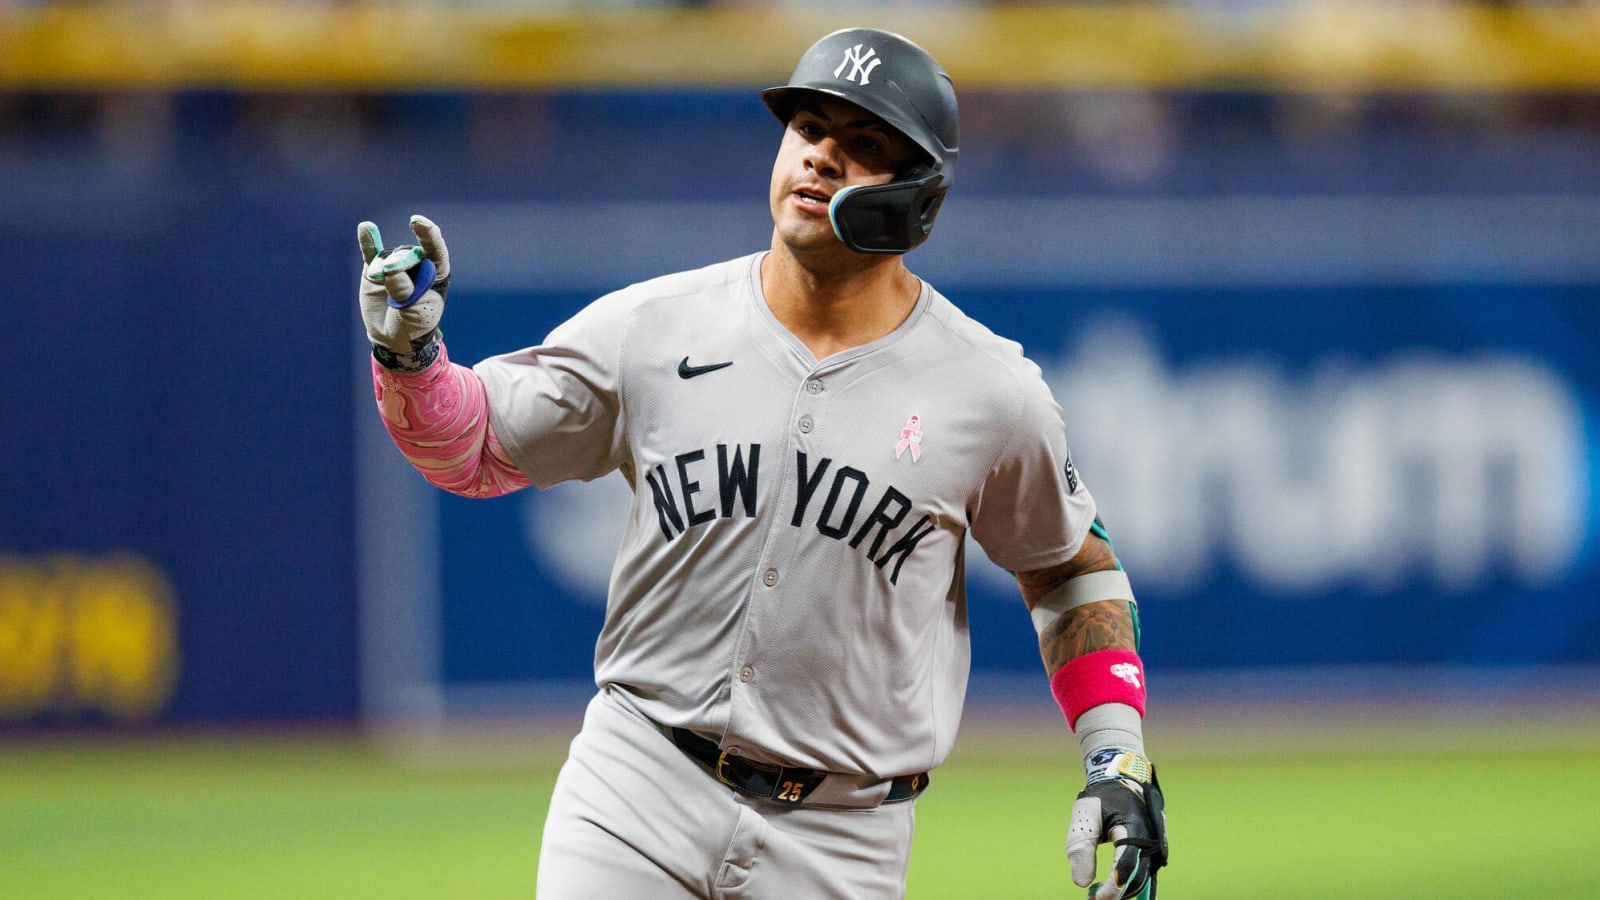 The Yankees’ batting order could get even better with ice-cold infielder heating up